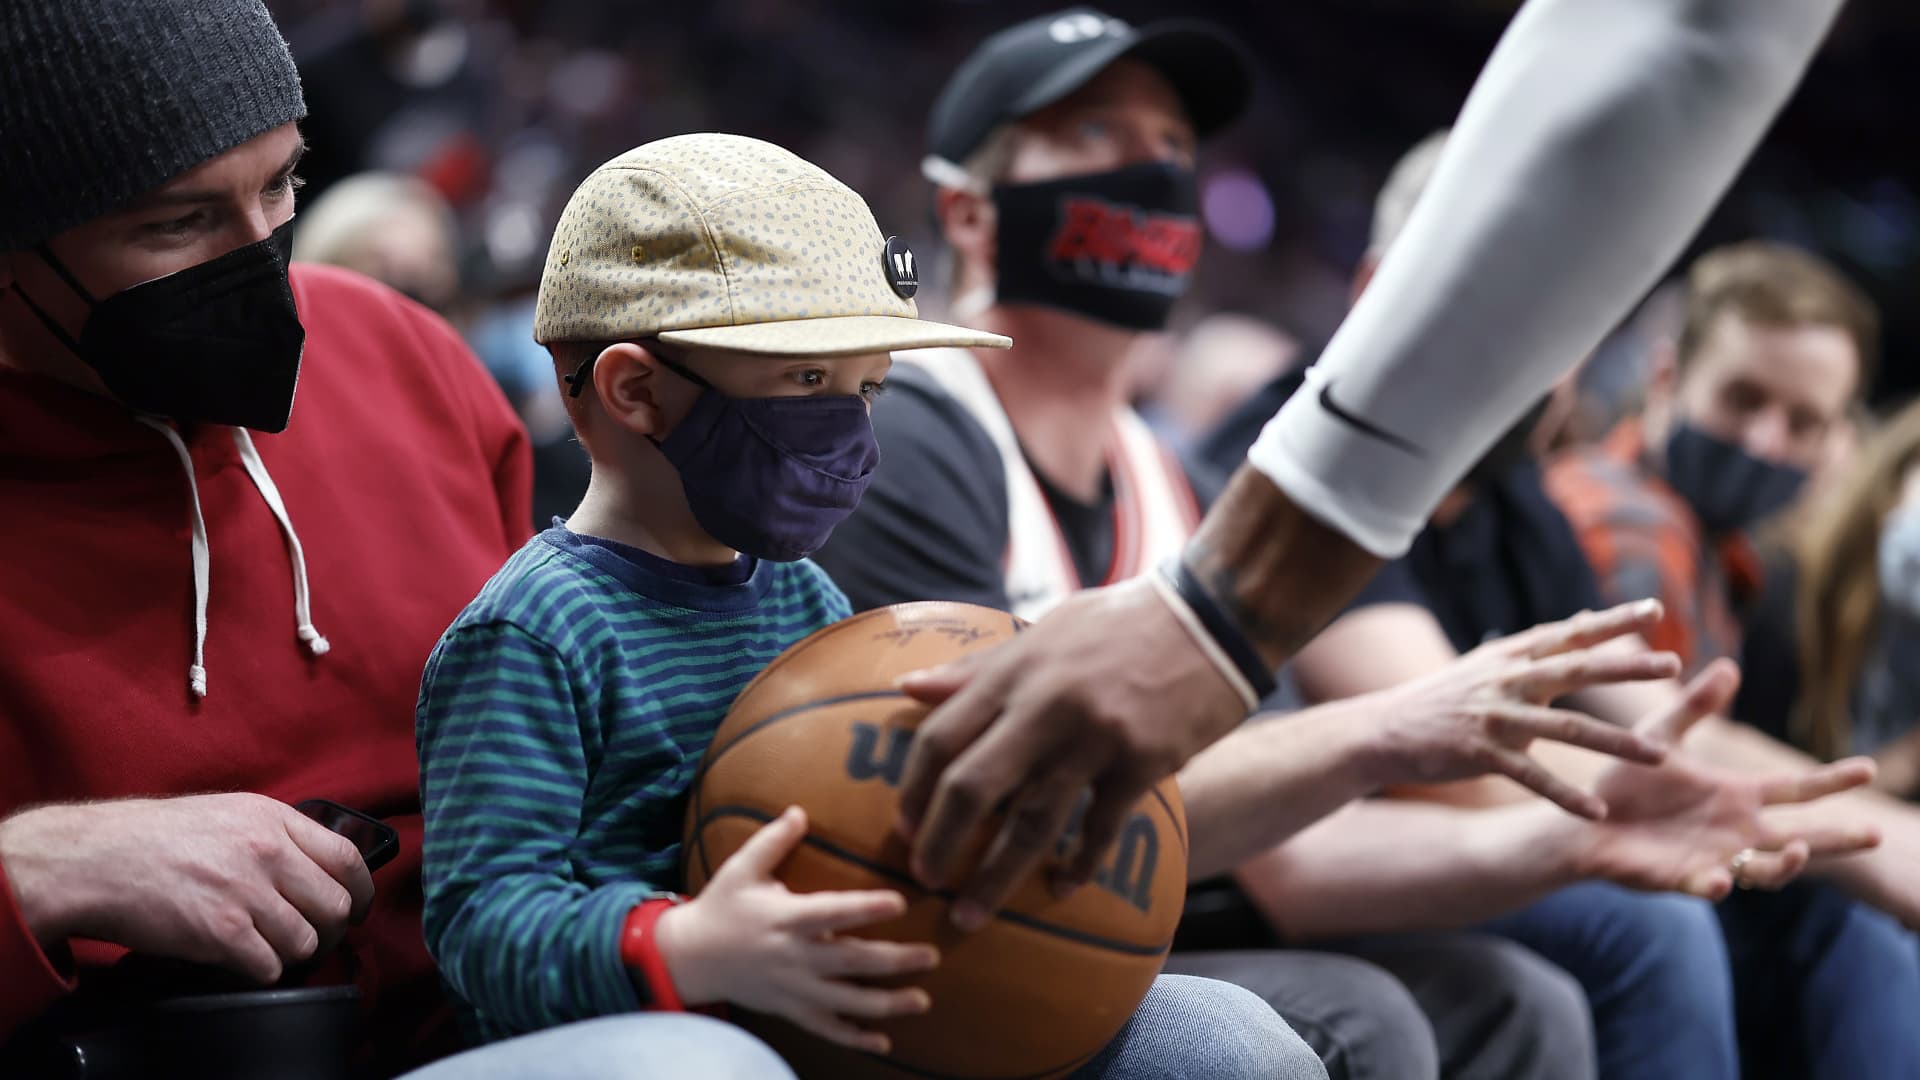 Marcus Morris Sr. # 8 of the Los Angeles Clippers hands a ball to a young fan during the first half against the Portland Trail Blazers at Moda Center on December 06, 2021 in Portland, Oregon.